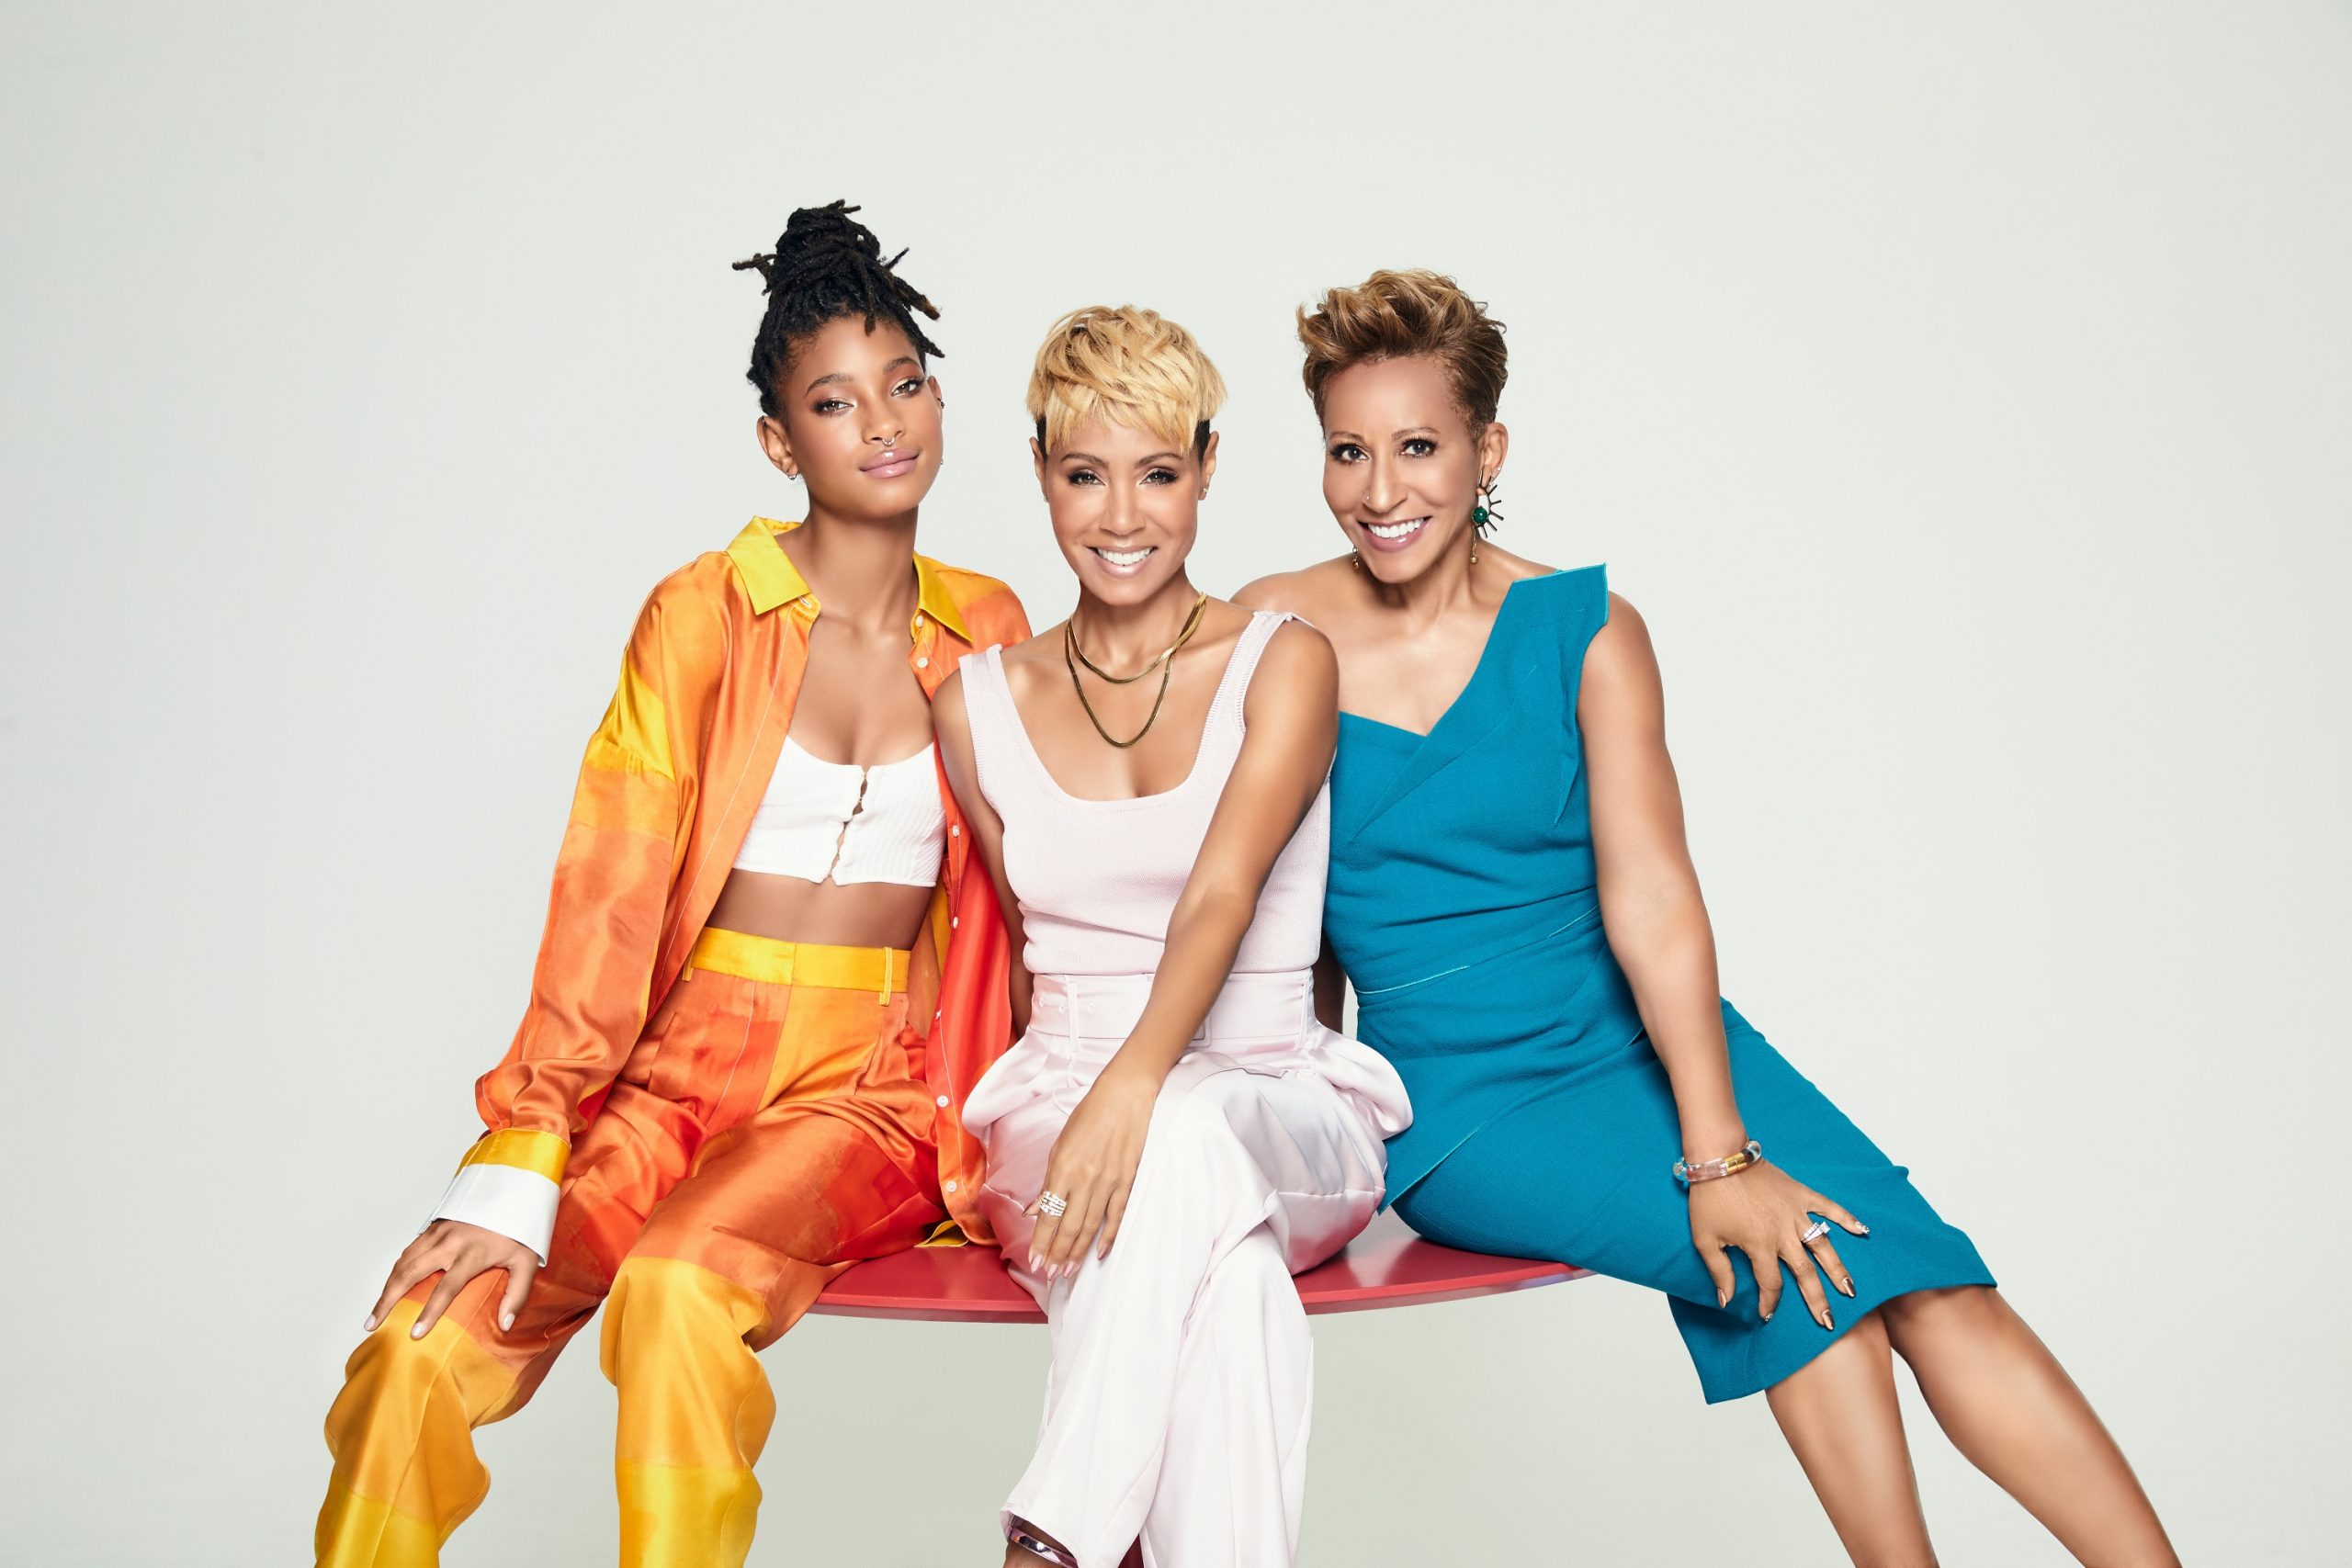 A ‘Red Table Talk’ Exclusive Clip With Jada Pinkett Smith Reveals a Very Different Message Before the Holidays